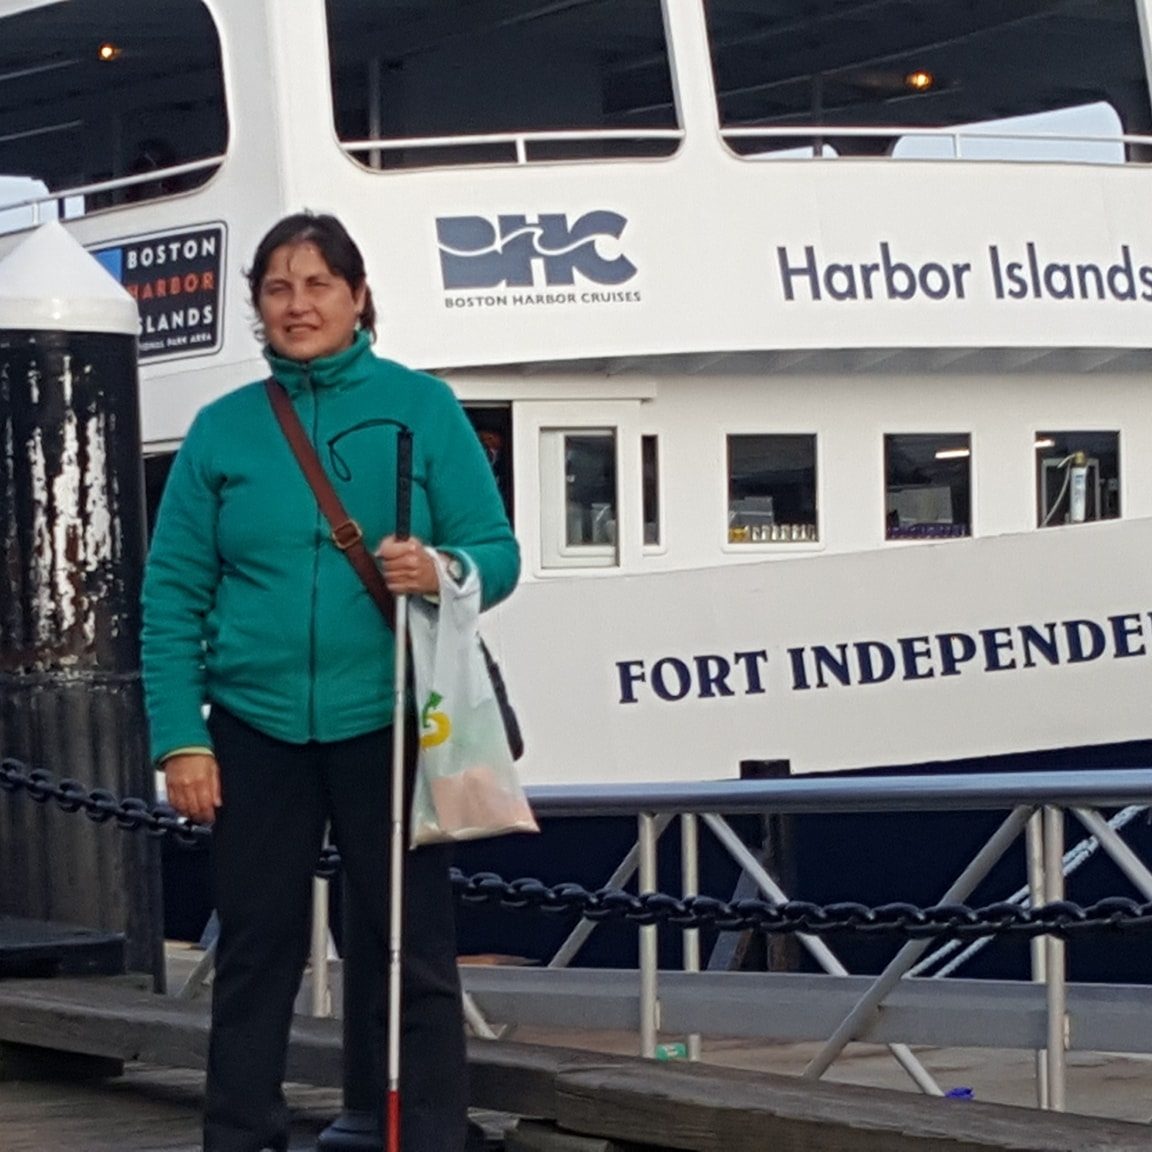 Christine, smiling and holding her mobility cane, stands in front of the Fort Independence boat at Boston Harbor Cruises.